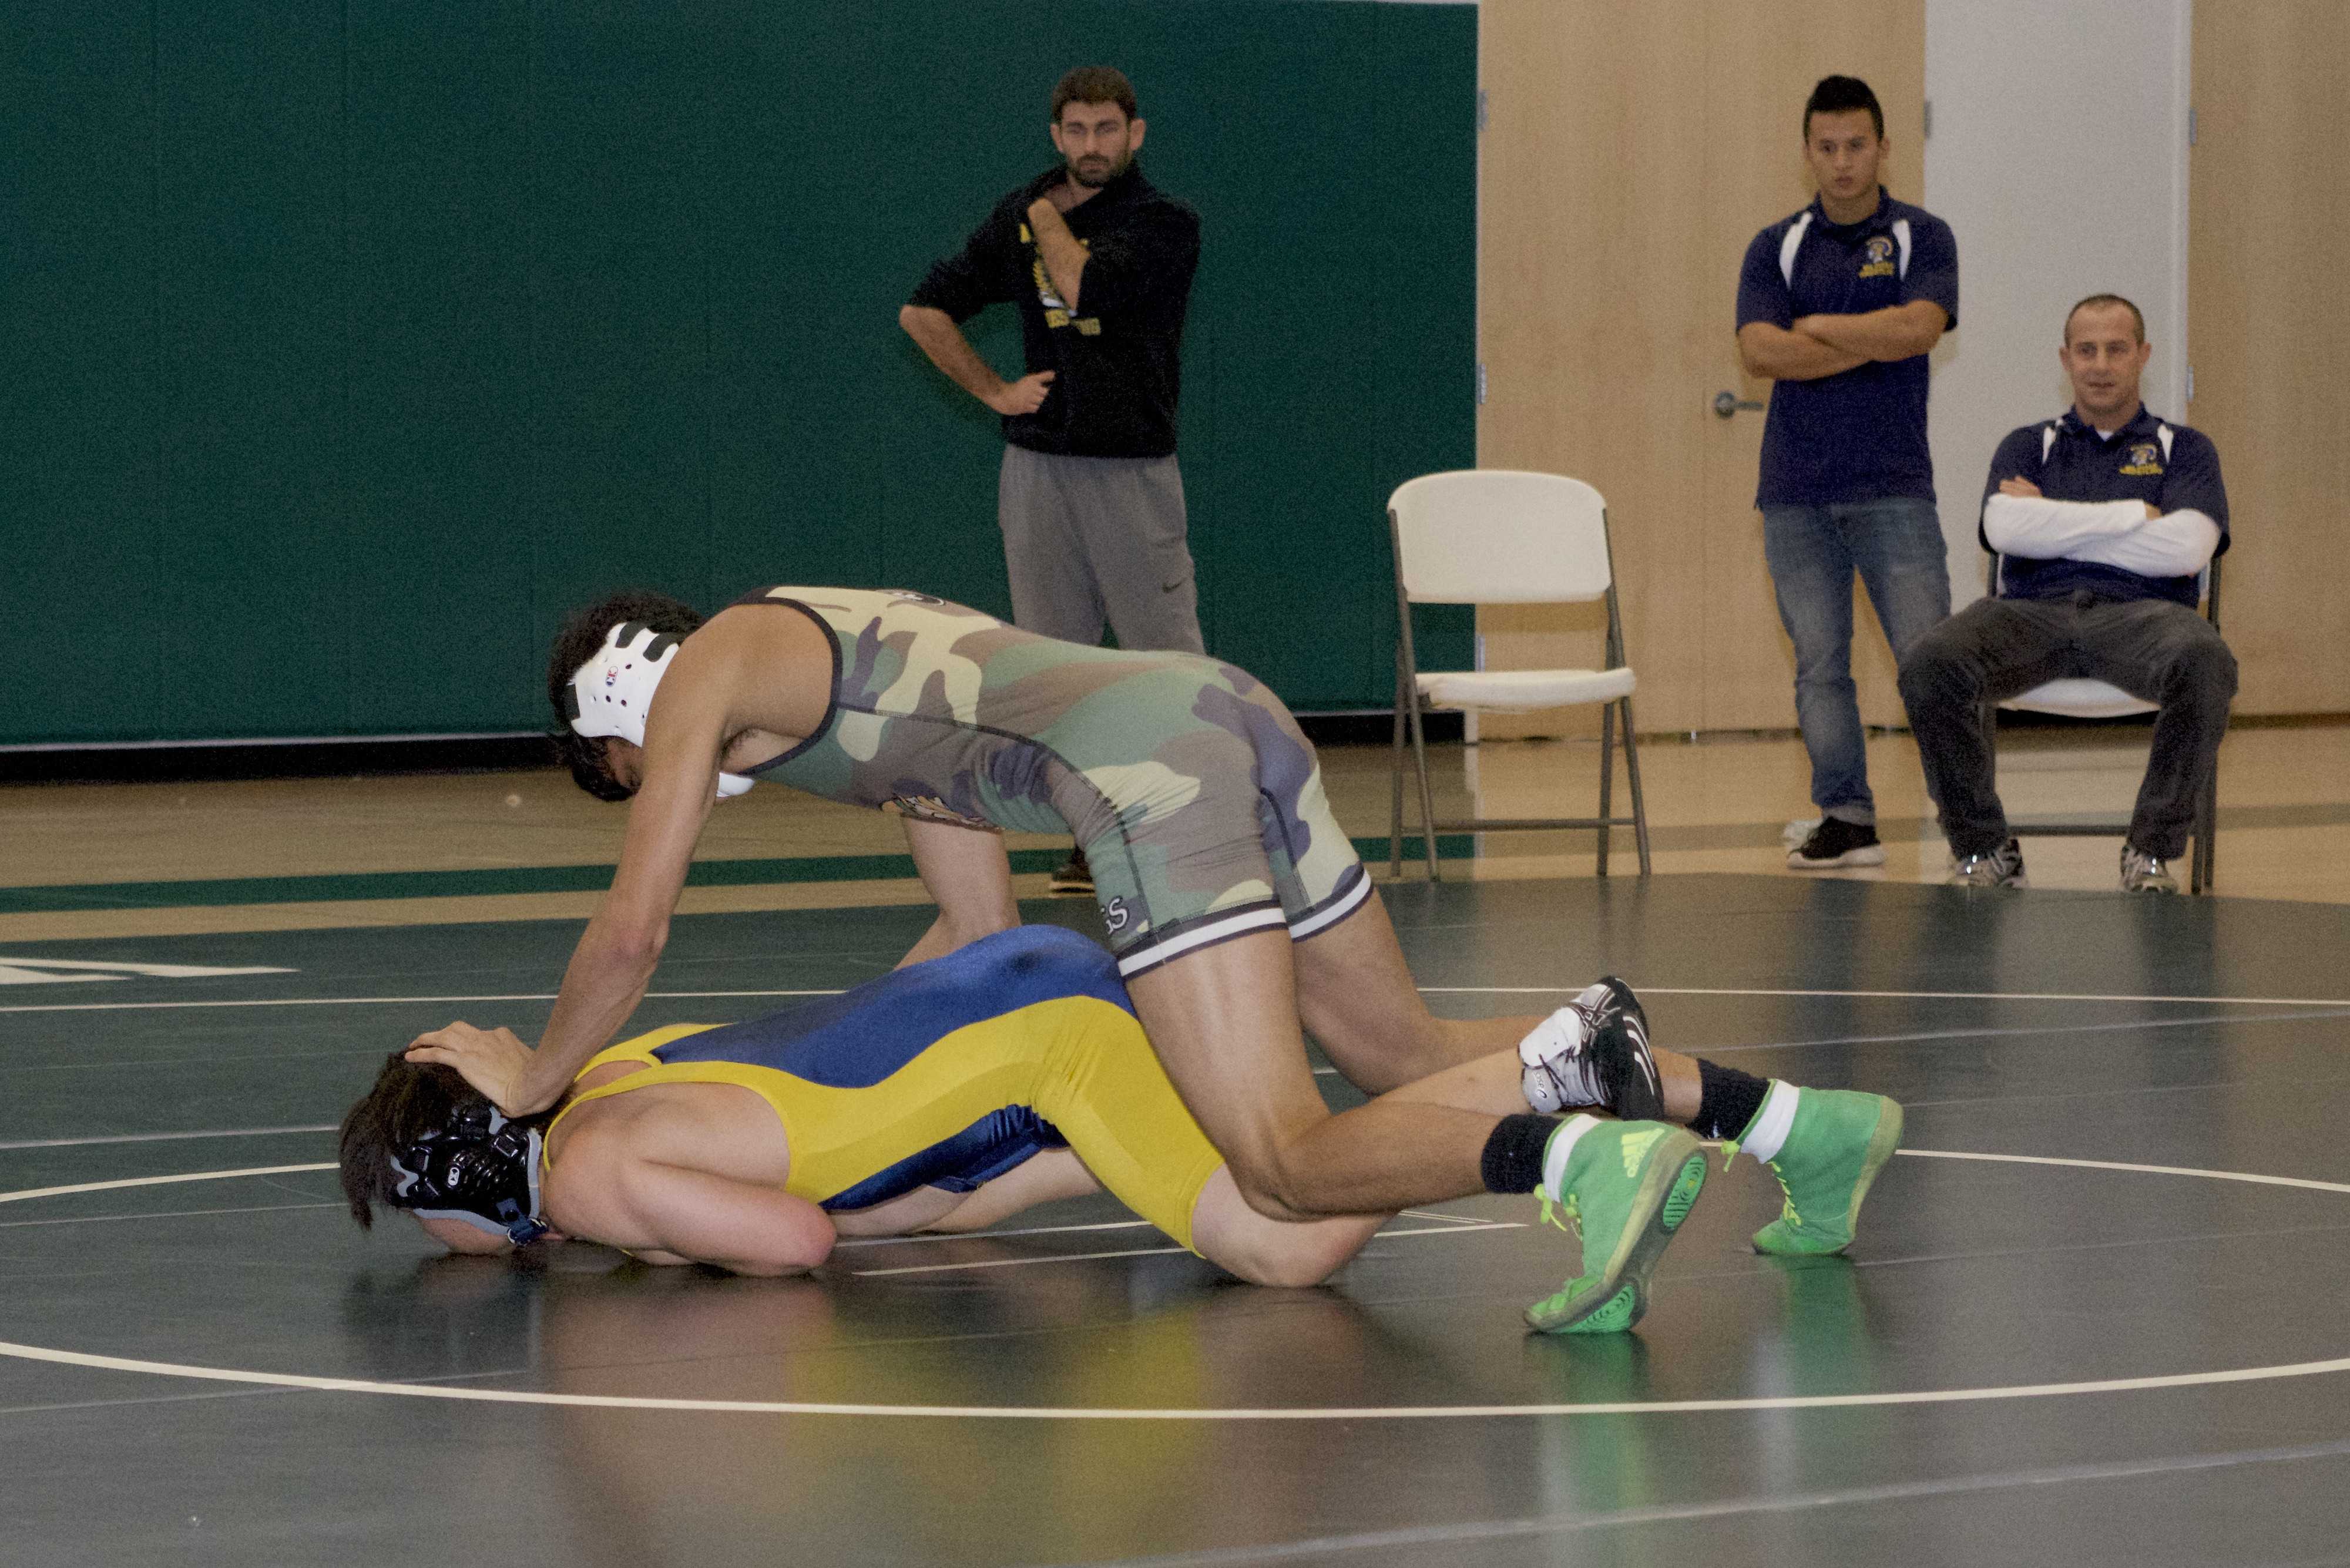 Palo Alto High School varsity wrestler Calvin Grewal takes down his opponent, winning by technical fall. The dual meet against Milpitas High School marked the first time the Vikings competed in the new Peery Family Center. "Coming off our loss last week, we were motivated and trained hard all week," Grewal said. "It was great to win our first home dual [meet] in the new gym in front of our crowd." Photo: Finn Mennuti.